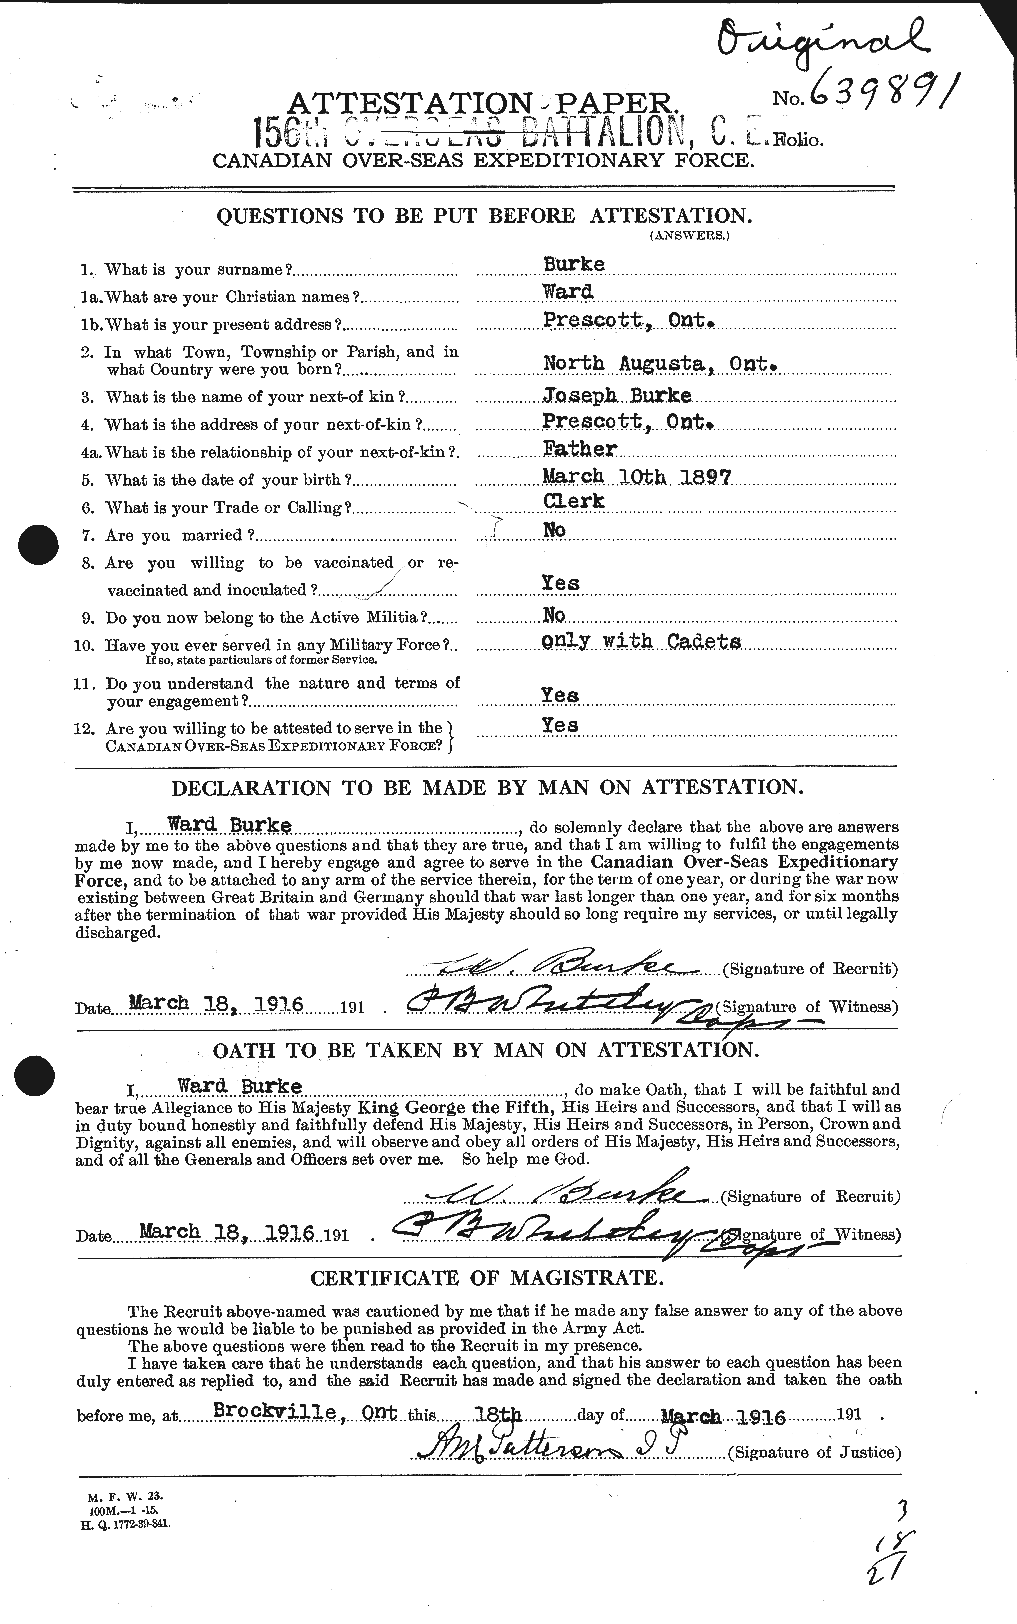 Personnel Records of the First World War - CEF 278496a